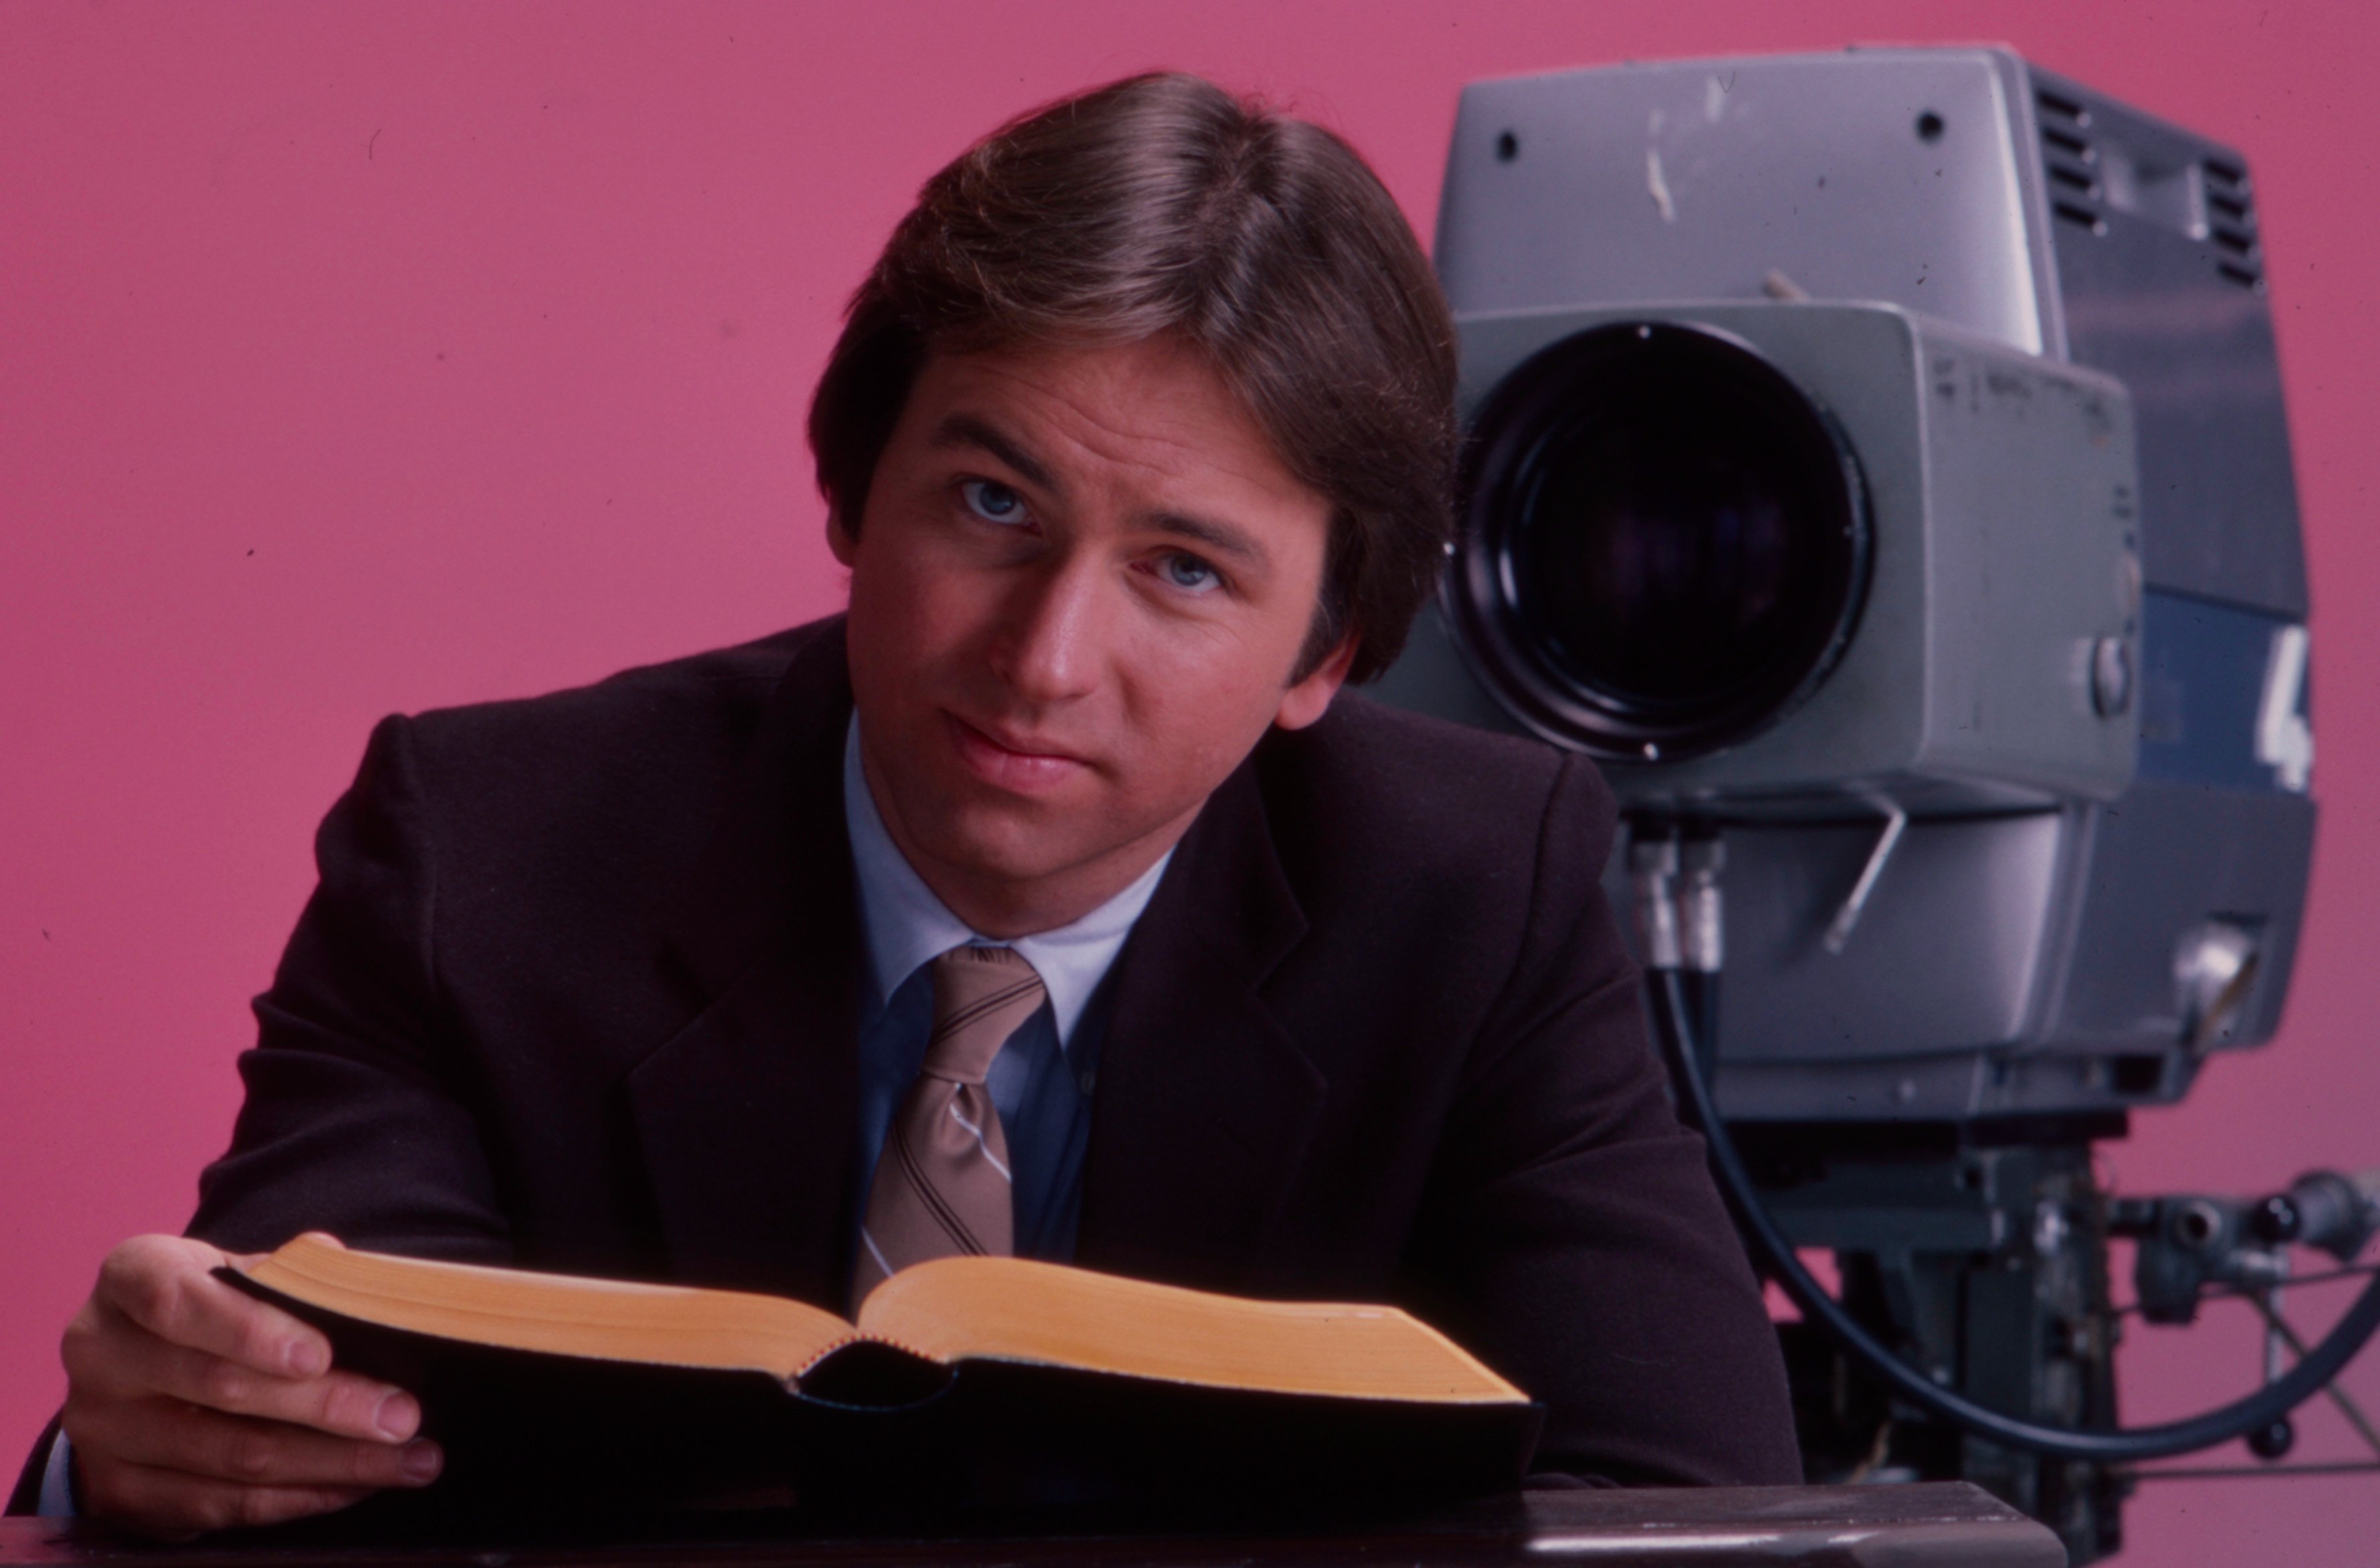 John Ritter poses in front of a camera.